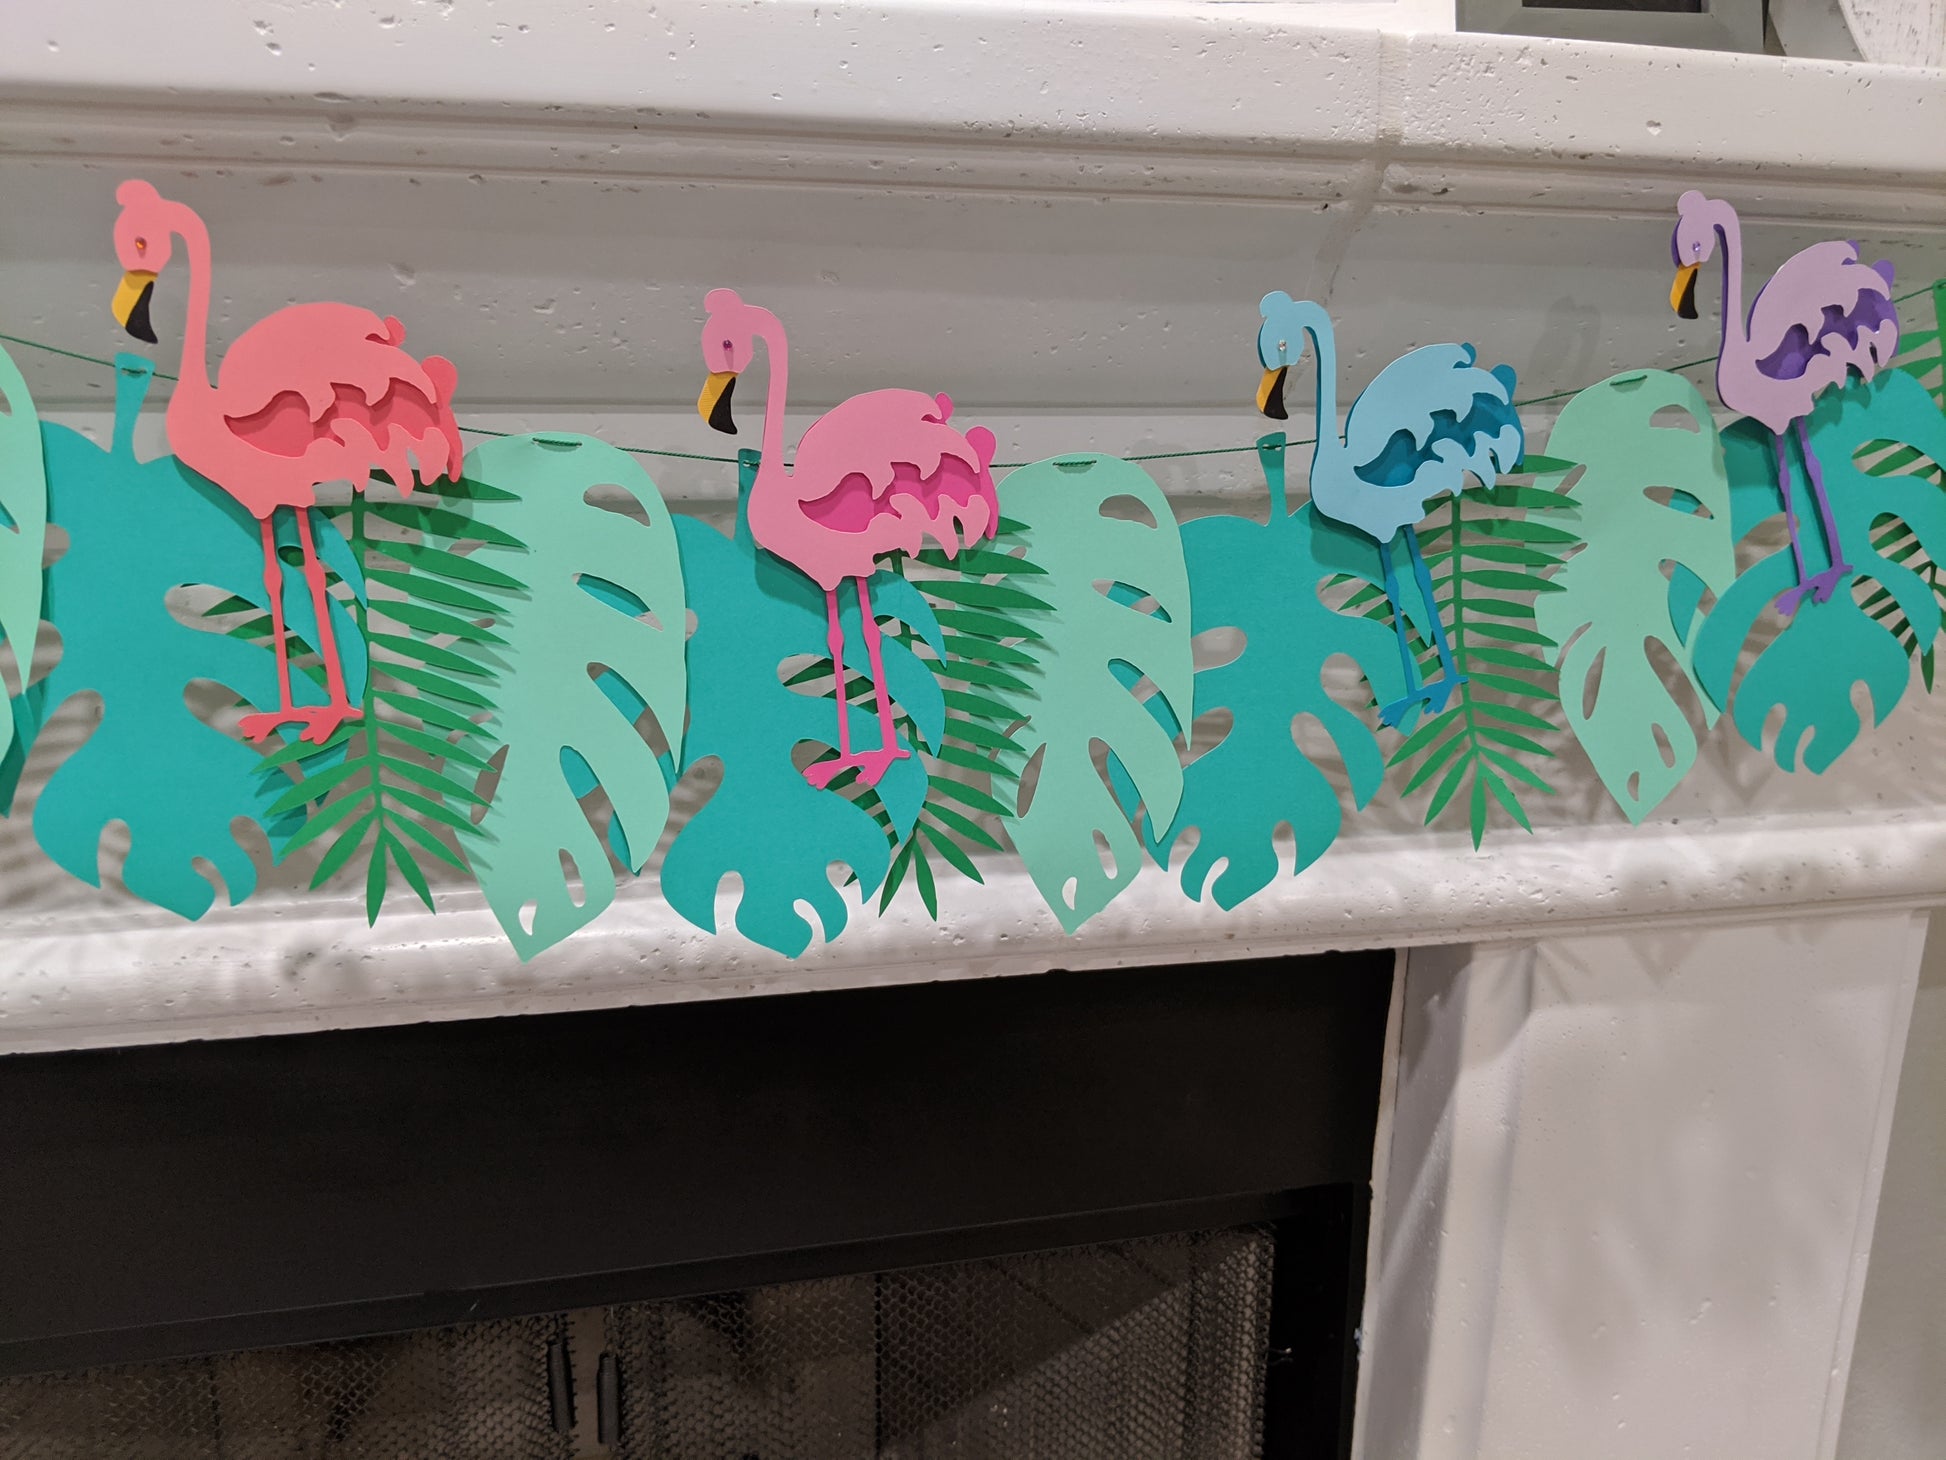 Cappa creations hand made paper banner, pool party decor, handmade designs, Hawaiian/ ocean birthday party theme, surfer birthday, tropical flamingo banner, birthday celebration, luau, bbq, tropical flamingos with monstera and palm leaves, colorful tropical birds